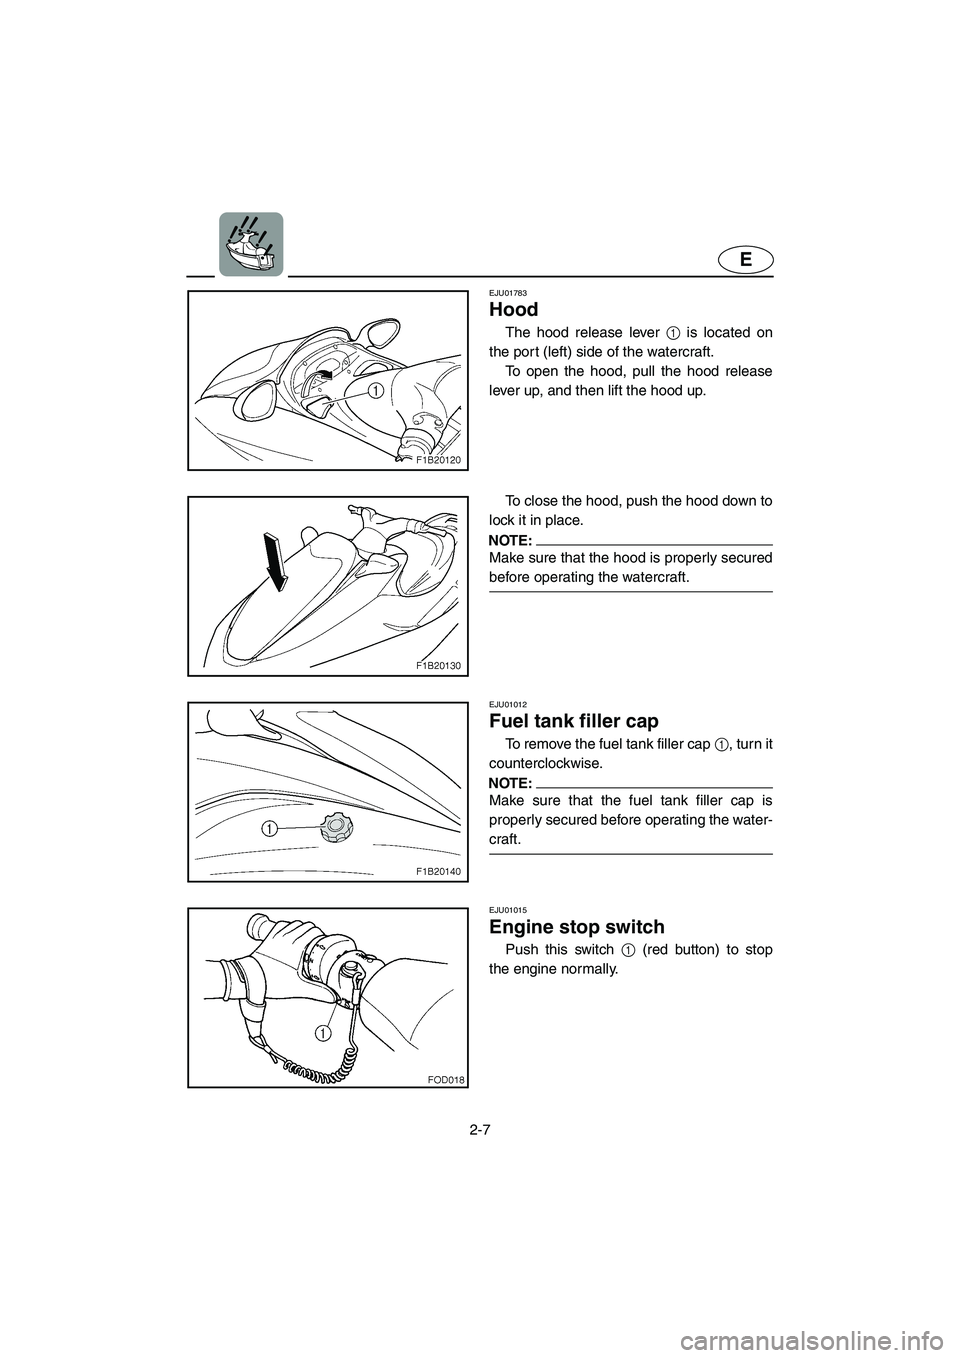 YAMAHA FX 2003  Owners Manual 2-7
E
EJU01783 
Hood 
The hood release lever 1 is located on
the port (left) side of the watercraft. 
To open the hood, pull the hood release
lever up, and then lift the hood up. 
To close the hood, p